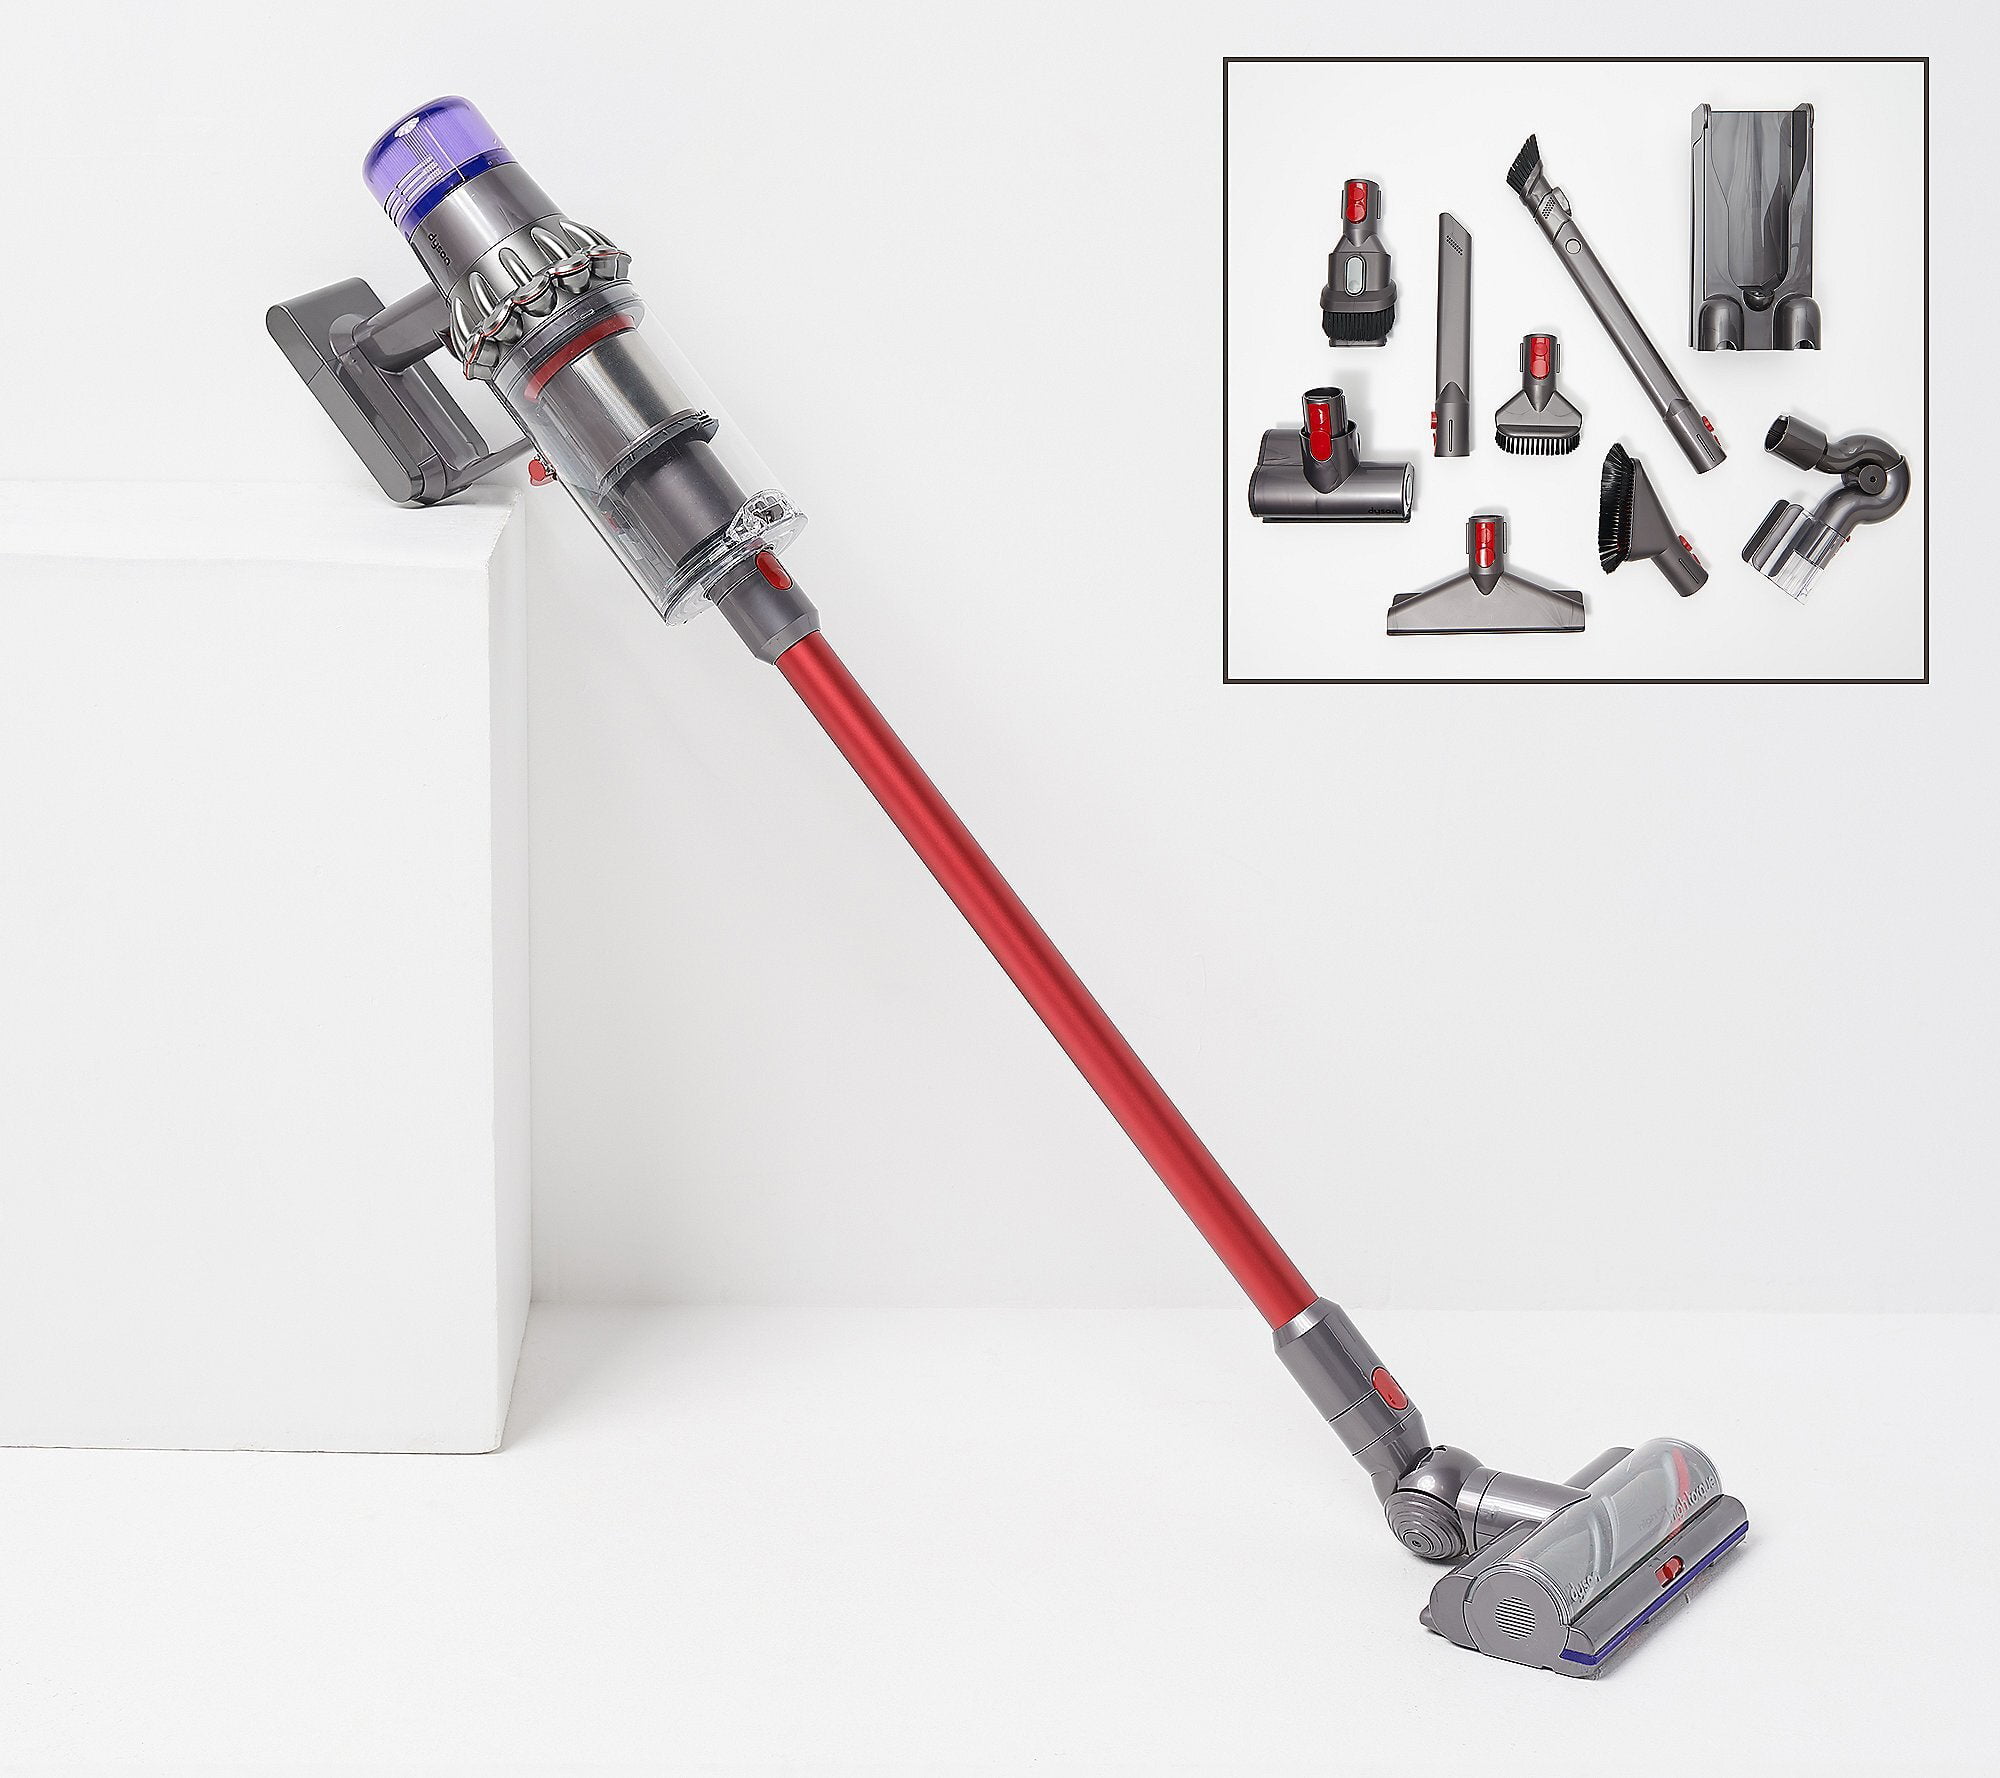 Details about   Dyson V11 Stick Vacuum Cleaner with Click-in Battery Red Tube Torque Drive Head 